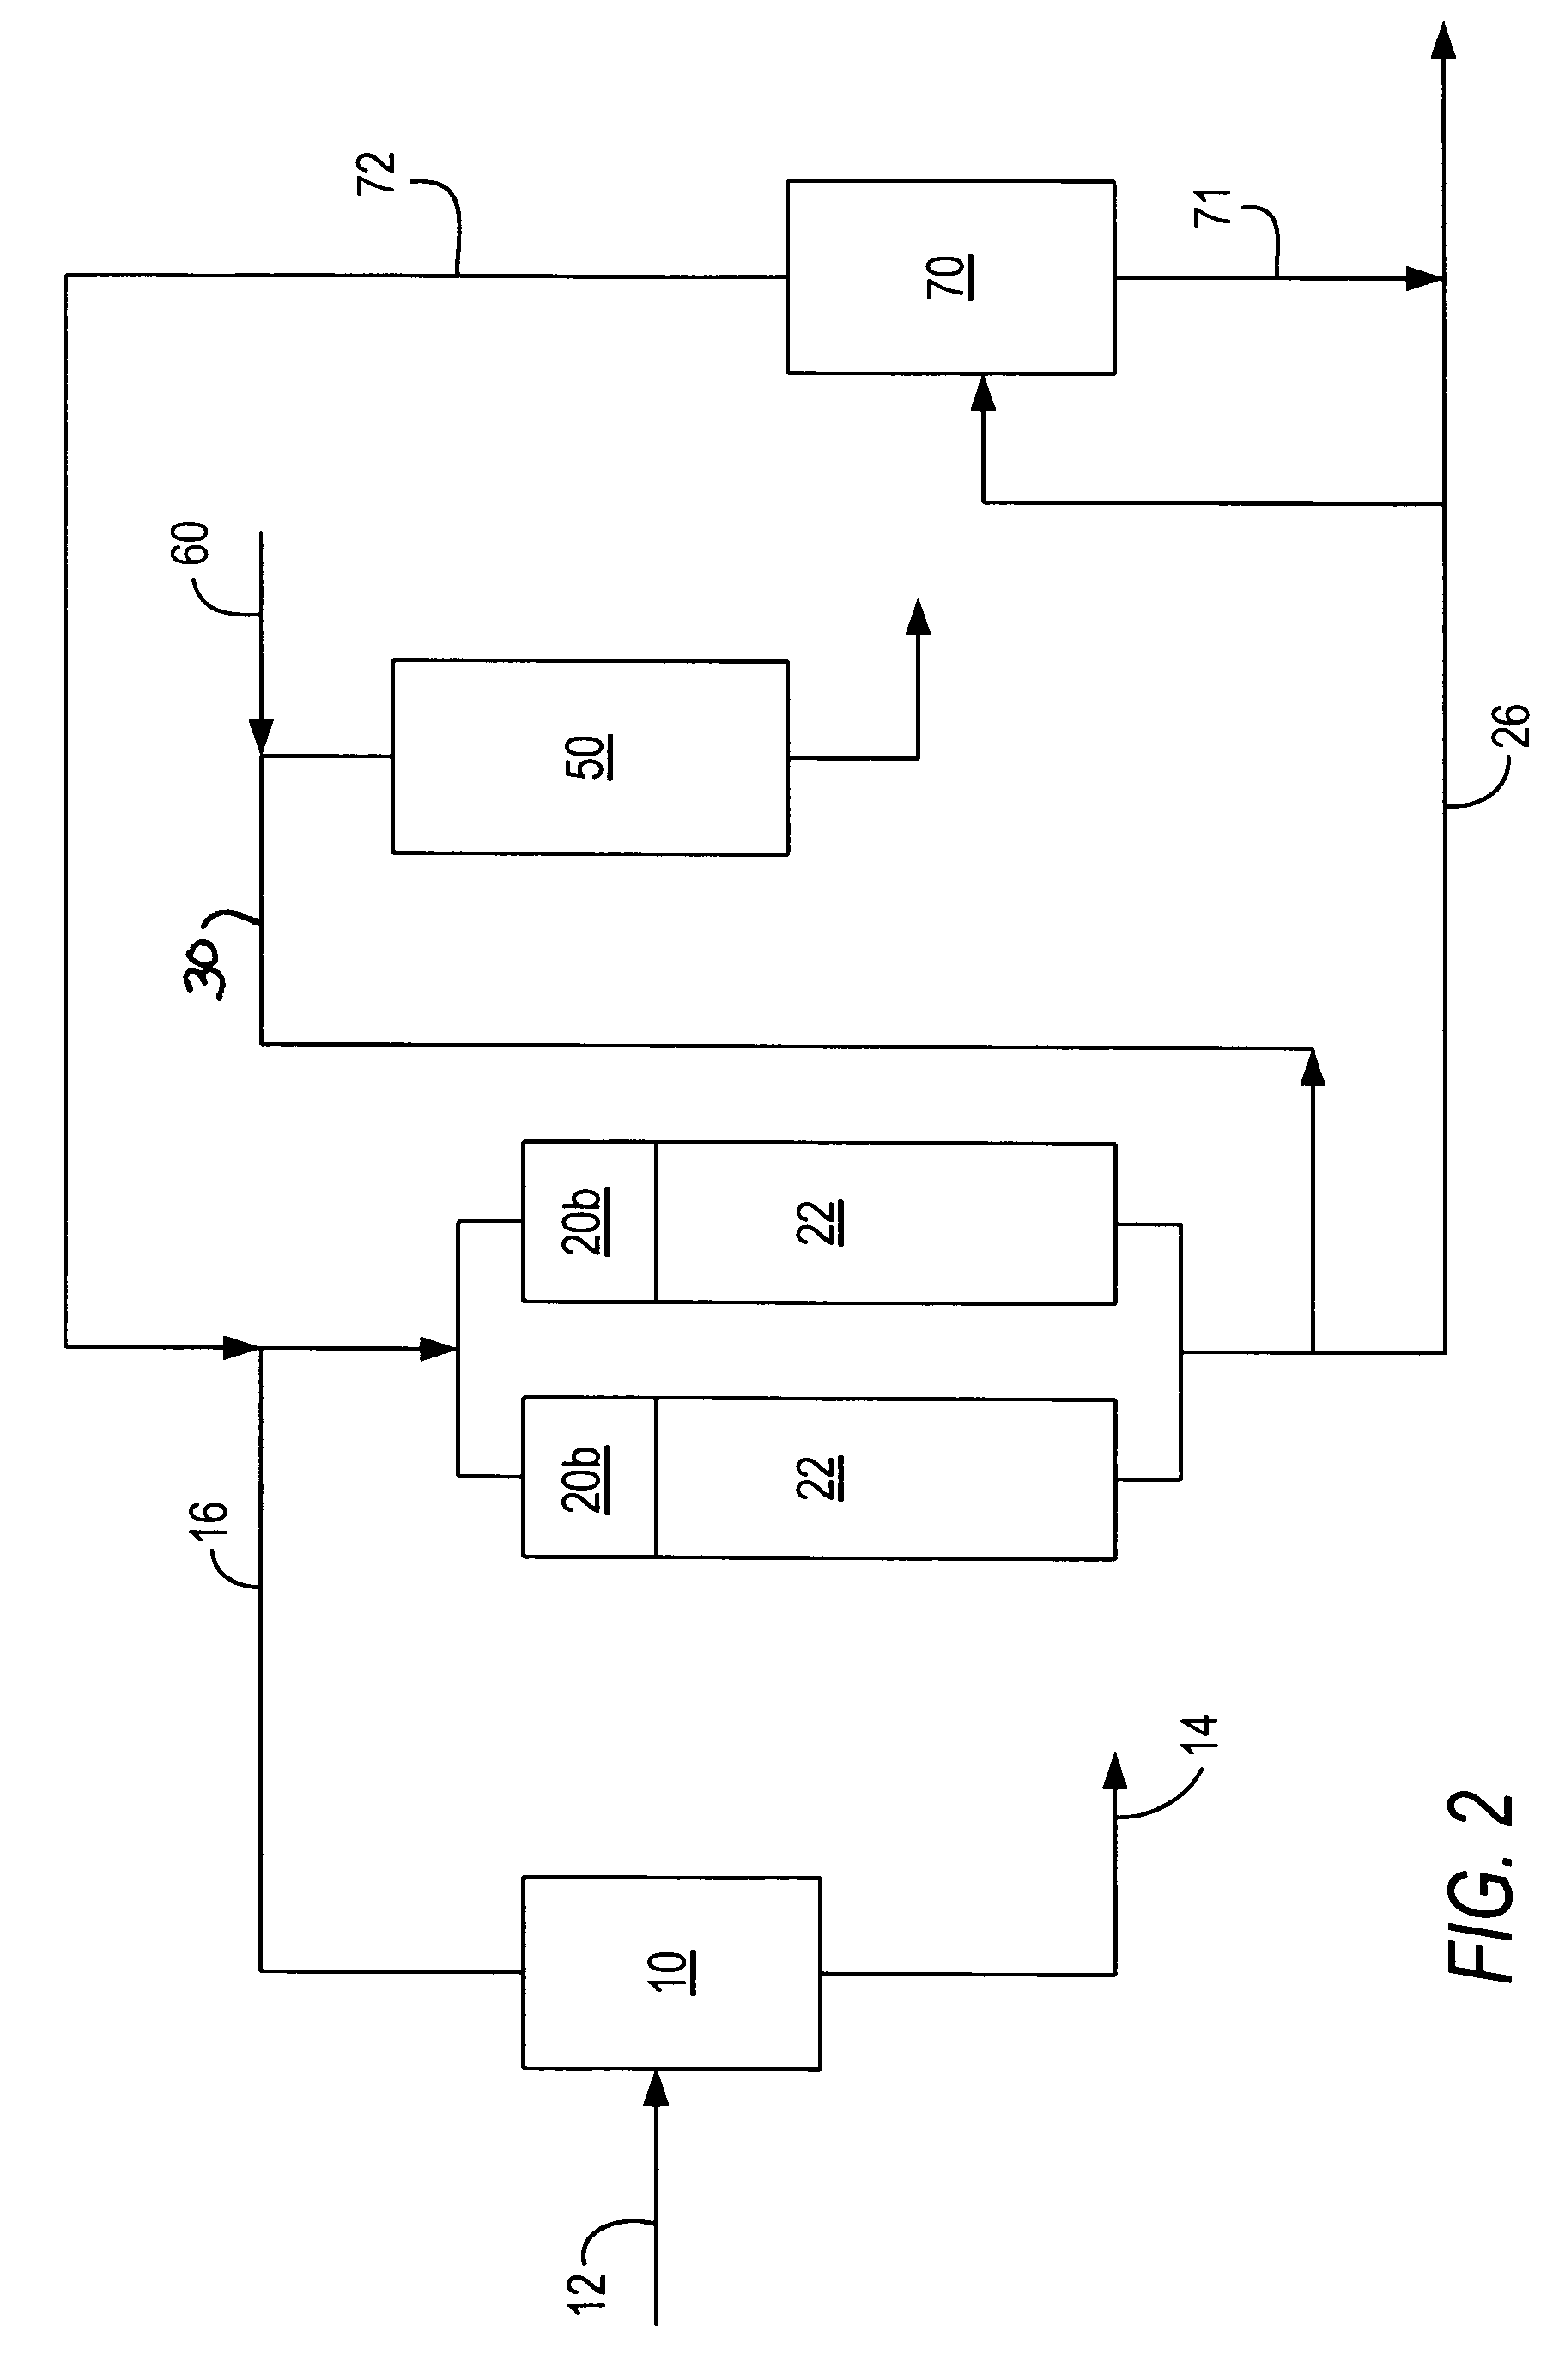 Process for removal of nitrogen and poly-nuclear aromatics from hydrocracker feedstocks